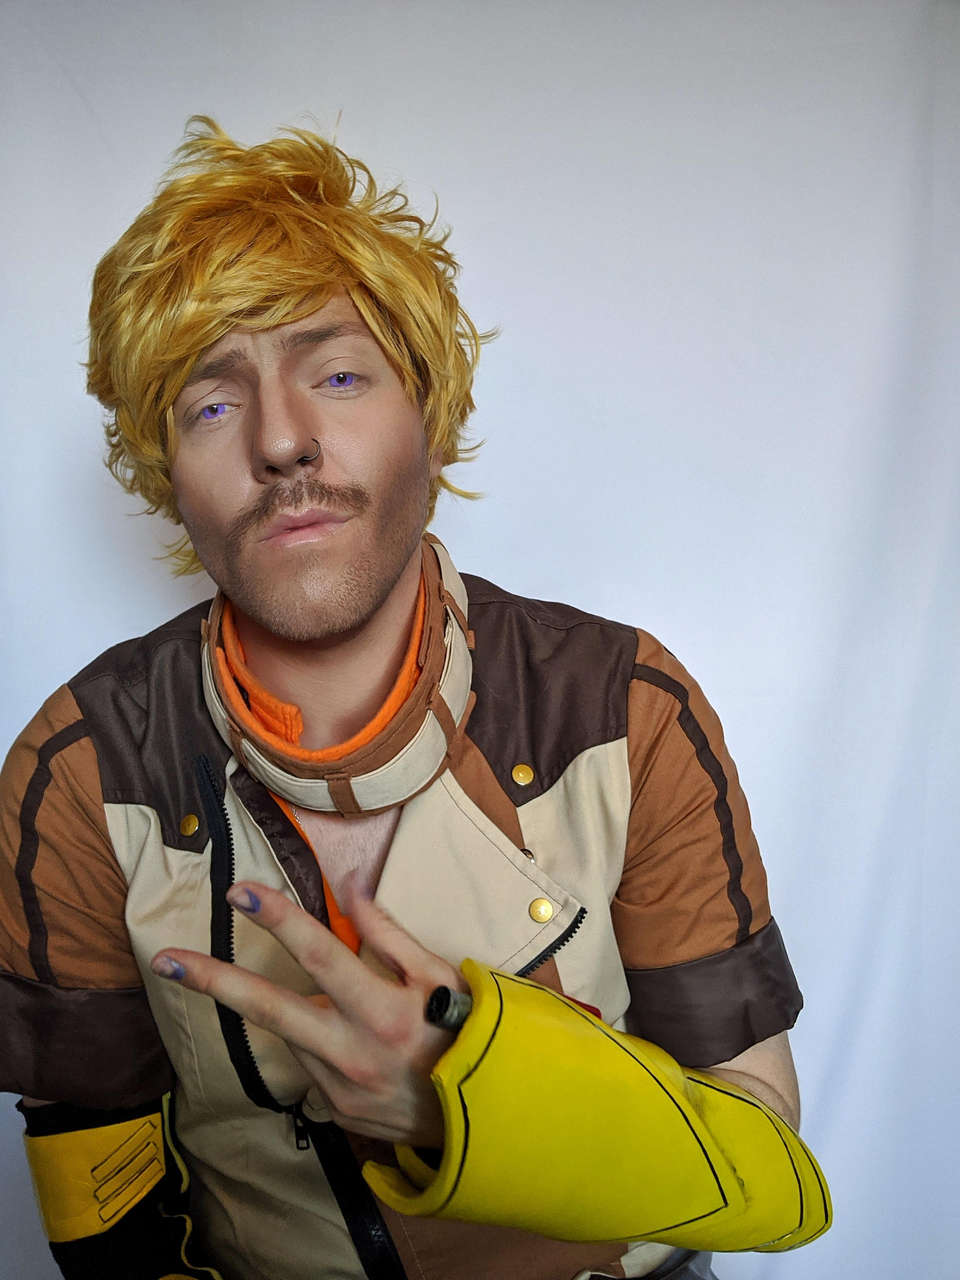 My Genderbent Yang Cosplay Now With A Moustach